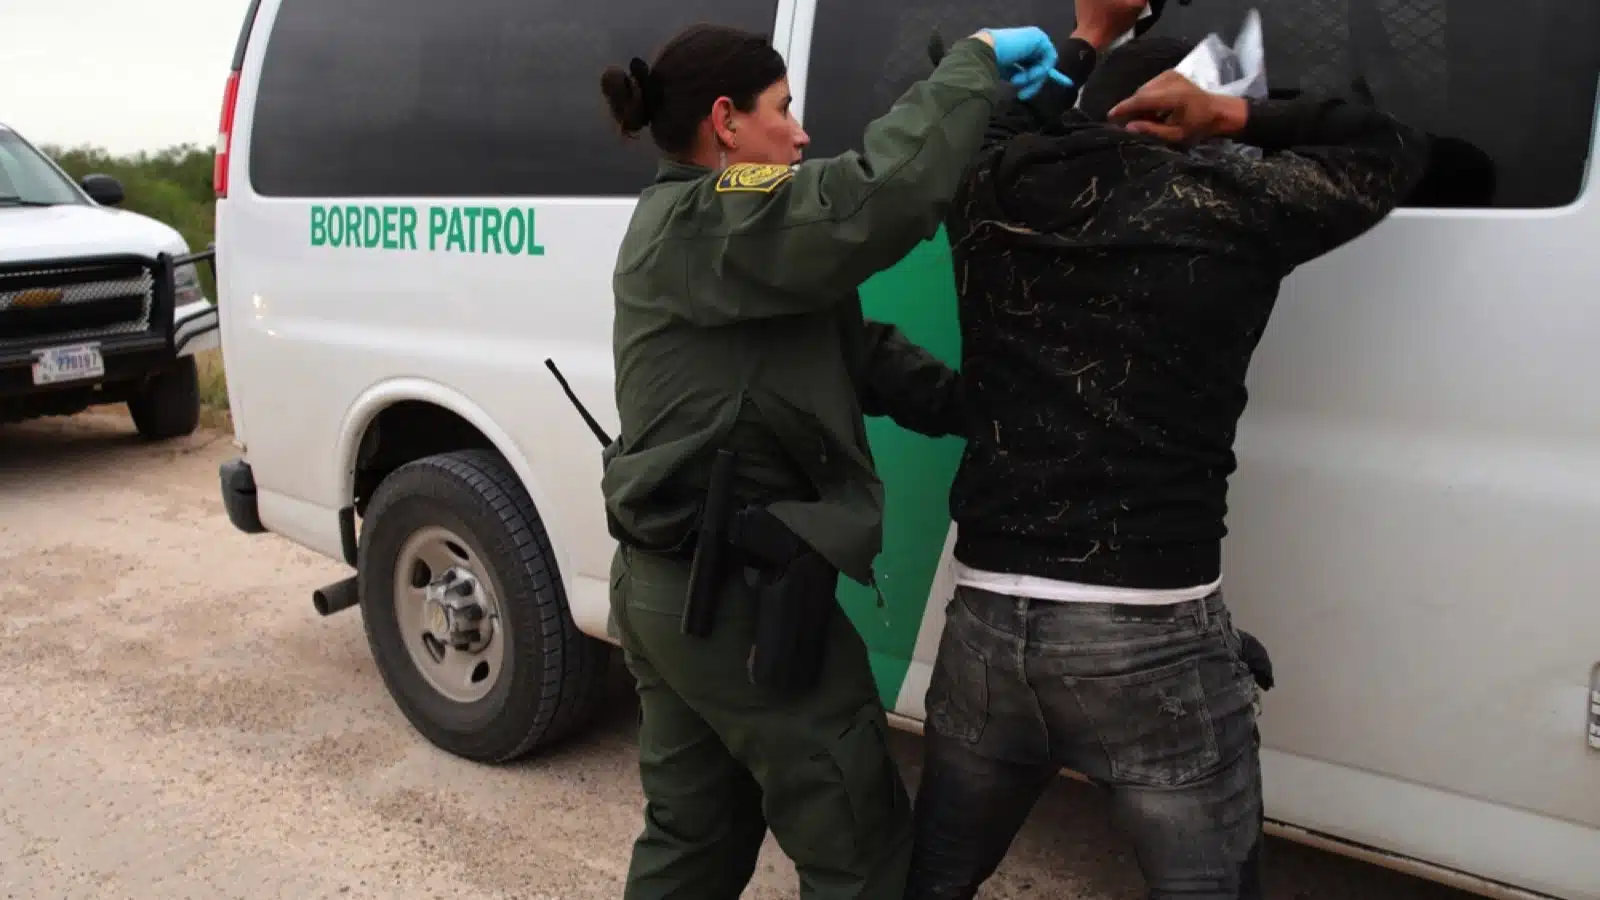 Mission, TX, USA - Feb. 16, 2023: A young Hispanic female Border Patrol agent searches a young Mexican man who crossed the Rio Grande River illegally to enter the U.S.